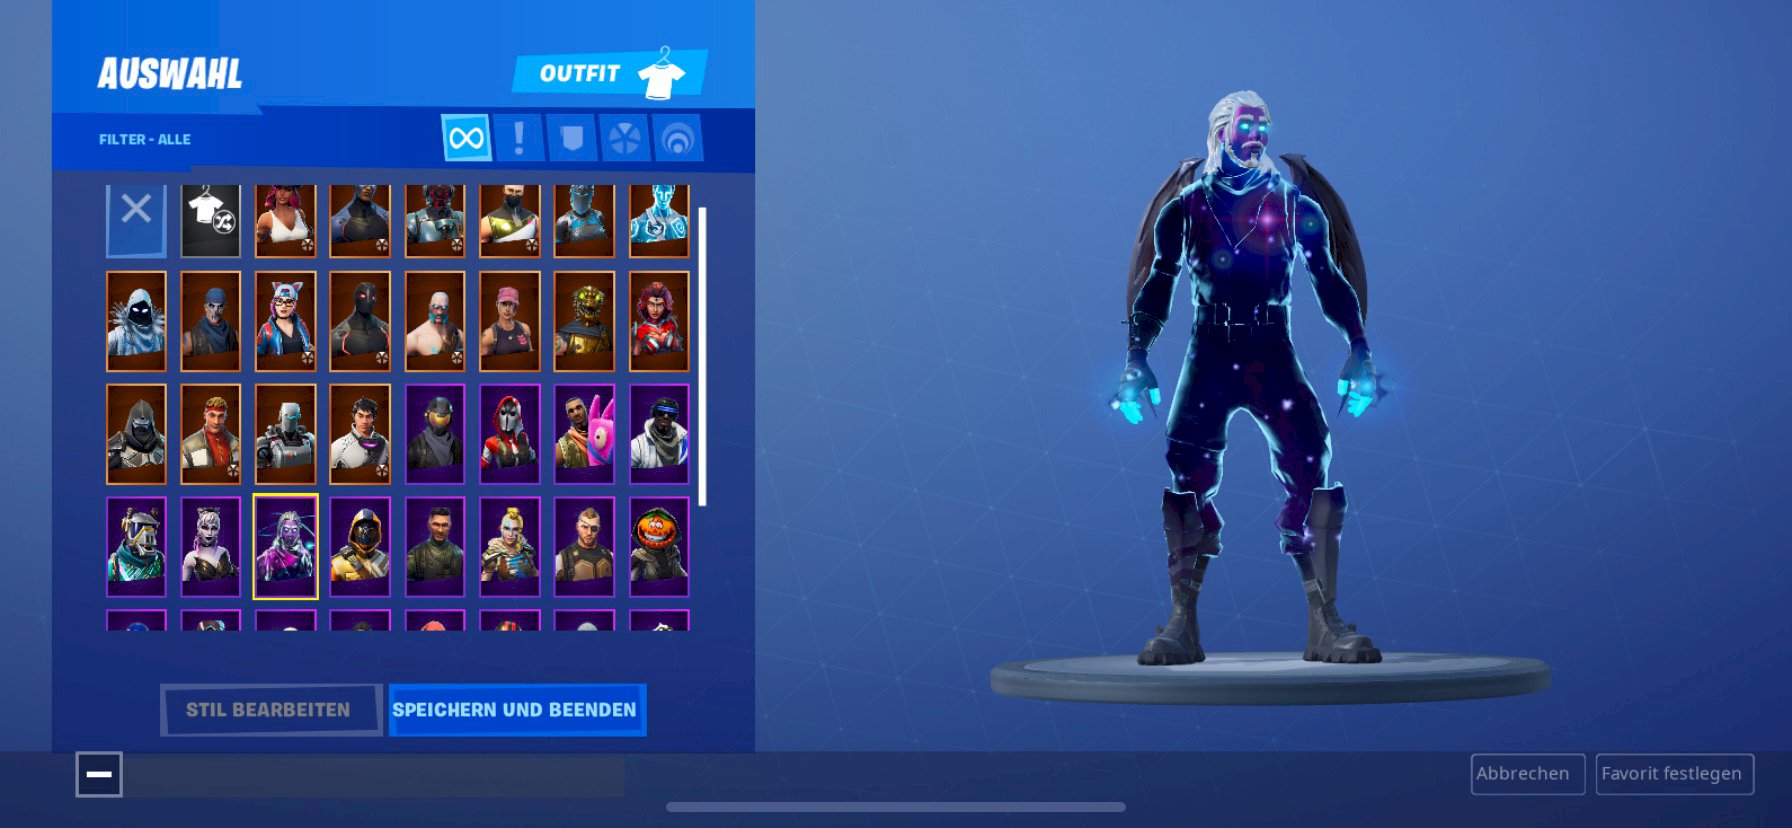 How Much Can The Galaxy Fortnite Skin Sell For How Much Is My Account Worth With Galaxy Skin And Save The World Re Fortnite